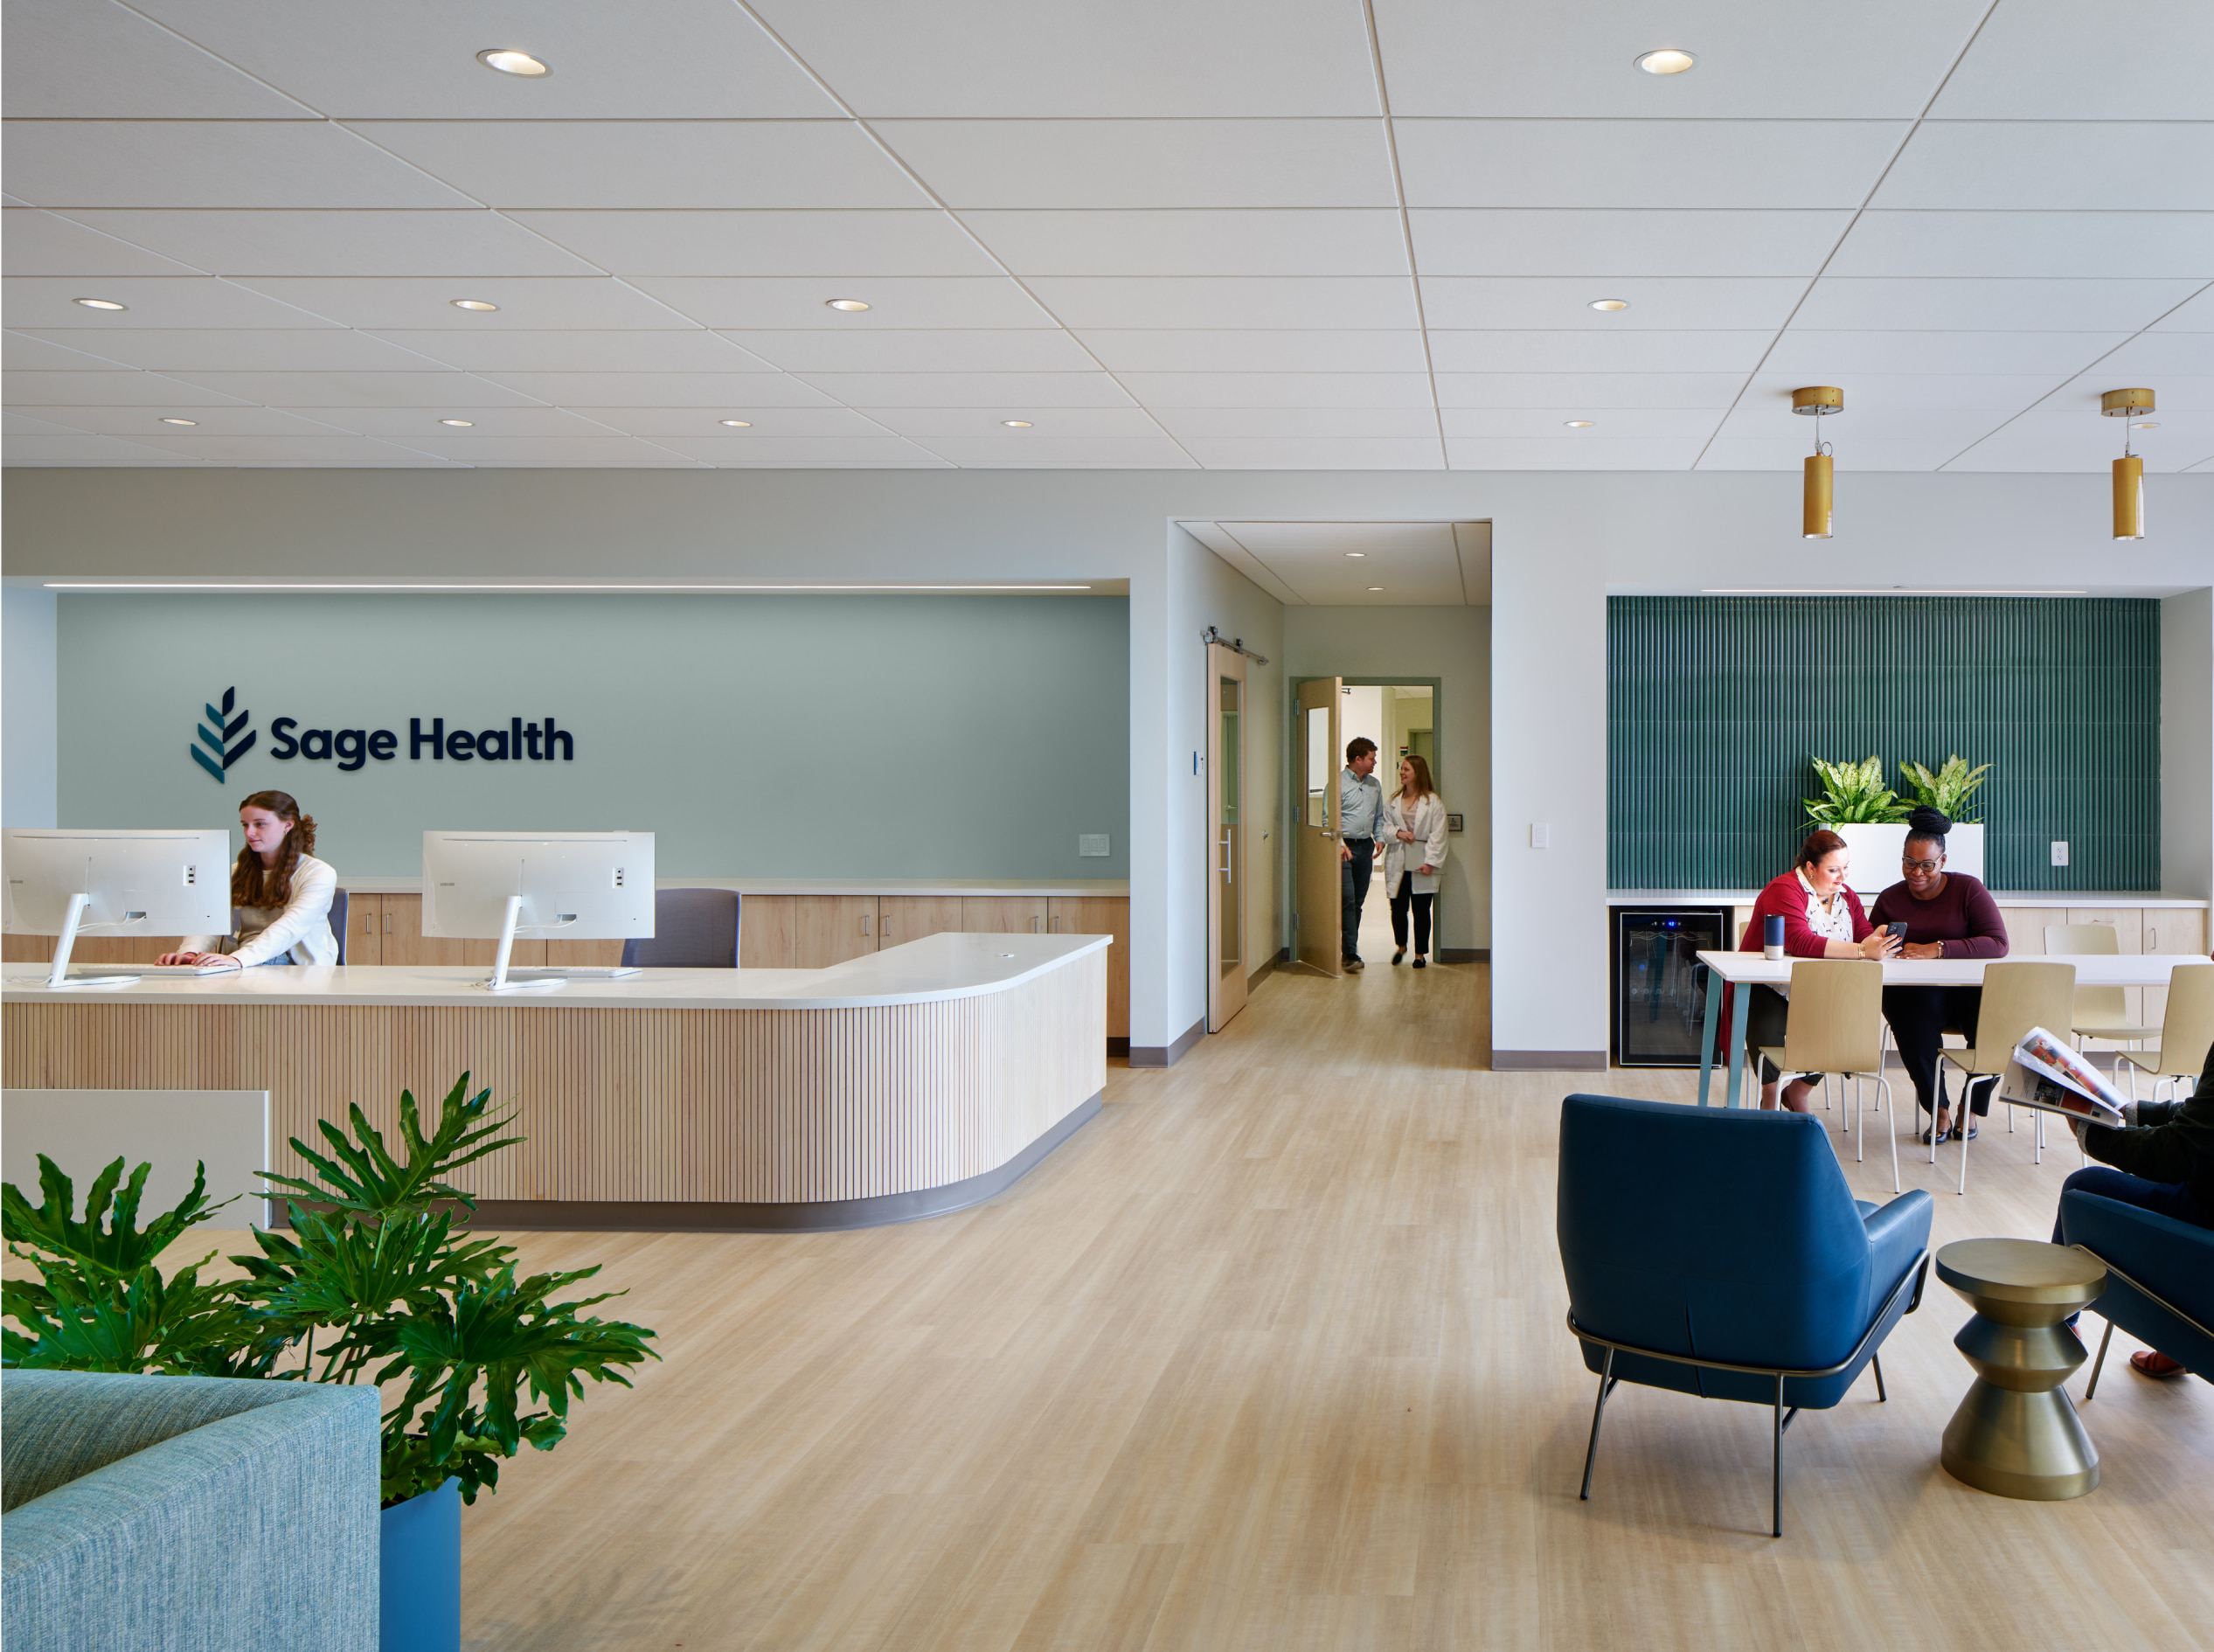 Sage Health Reception with people and a receptionist working